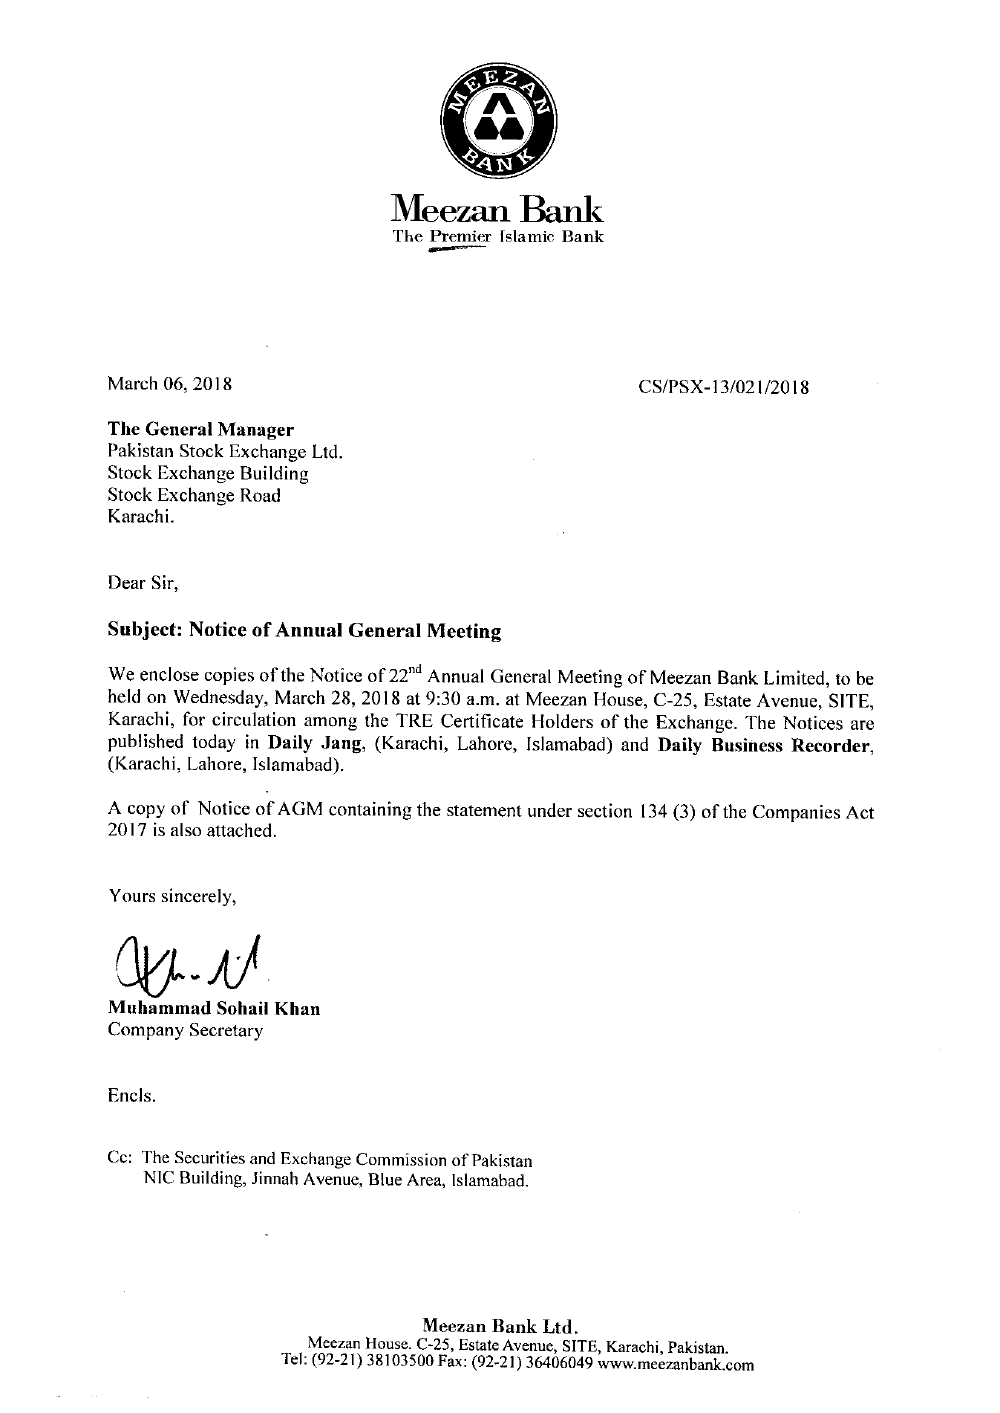 Notice-of-22nd-AGM